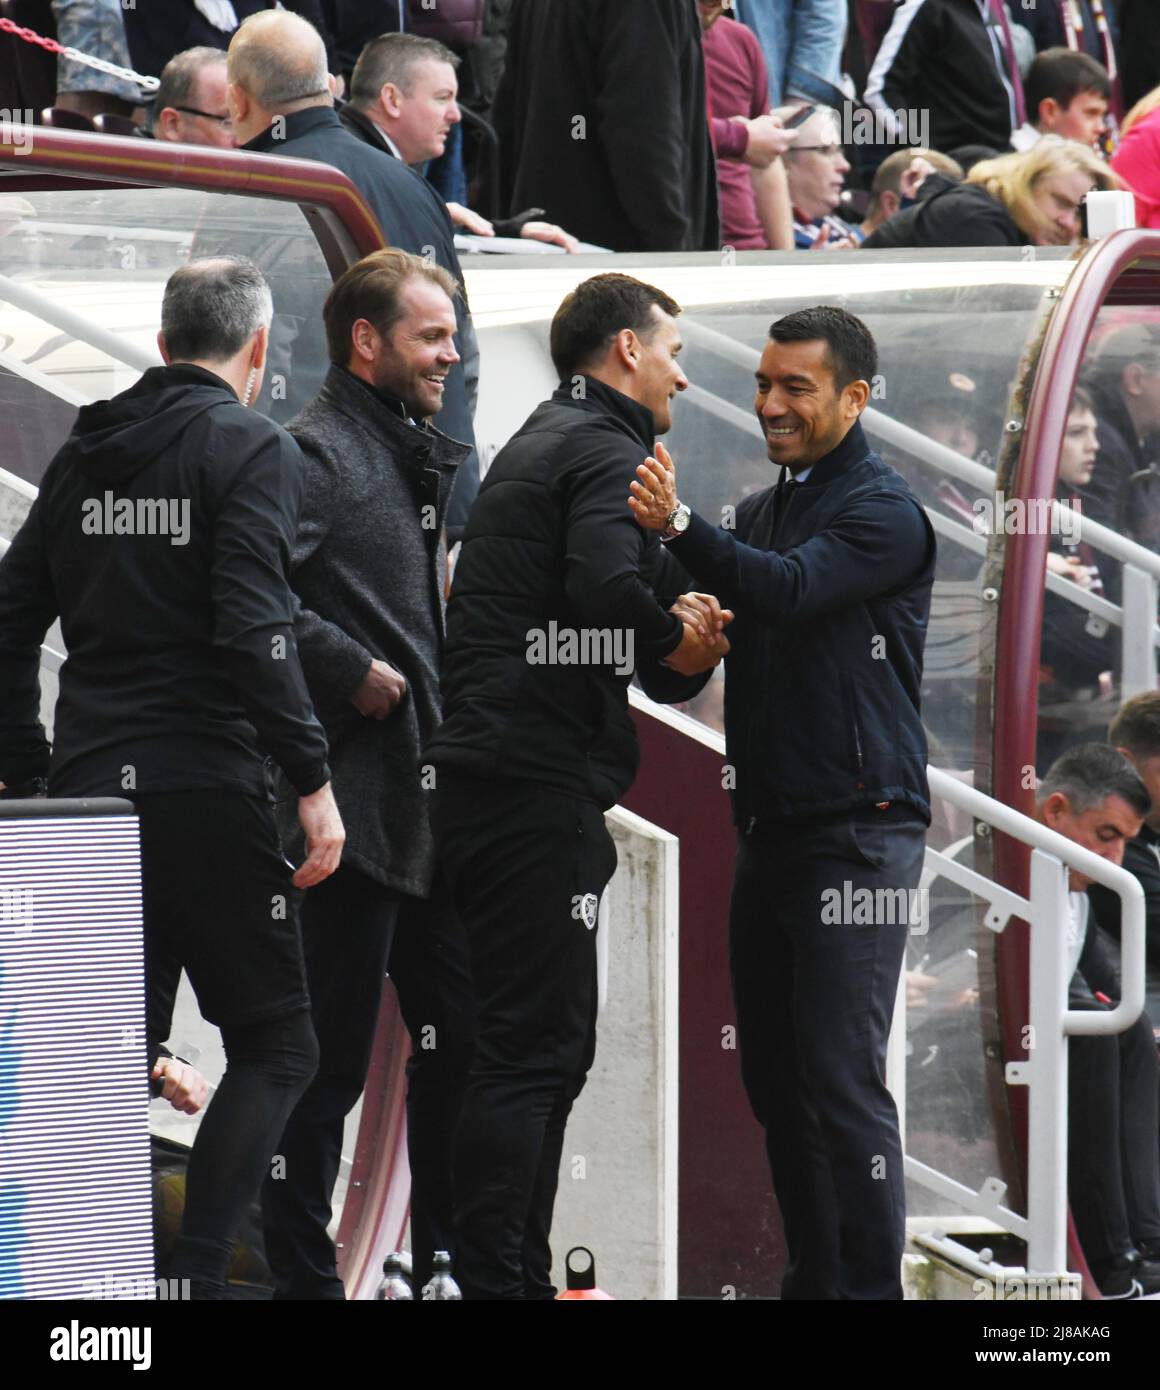 Tynecastle Park Edinburgh.Scotland UK .14th May 22. Hearts vs Rangers Cinch Premiership Match. Hearts' manager Robbie Neilson looks as coach Lee McCulloch receives birthday wishes from Rangers' manager, Giovanni van Bronckhorst Credit: eric mccowat/Alamy Live News Stock Photo